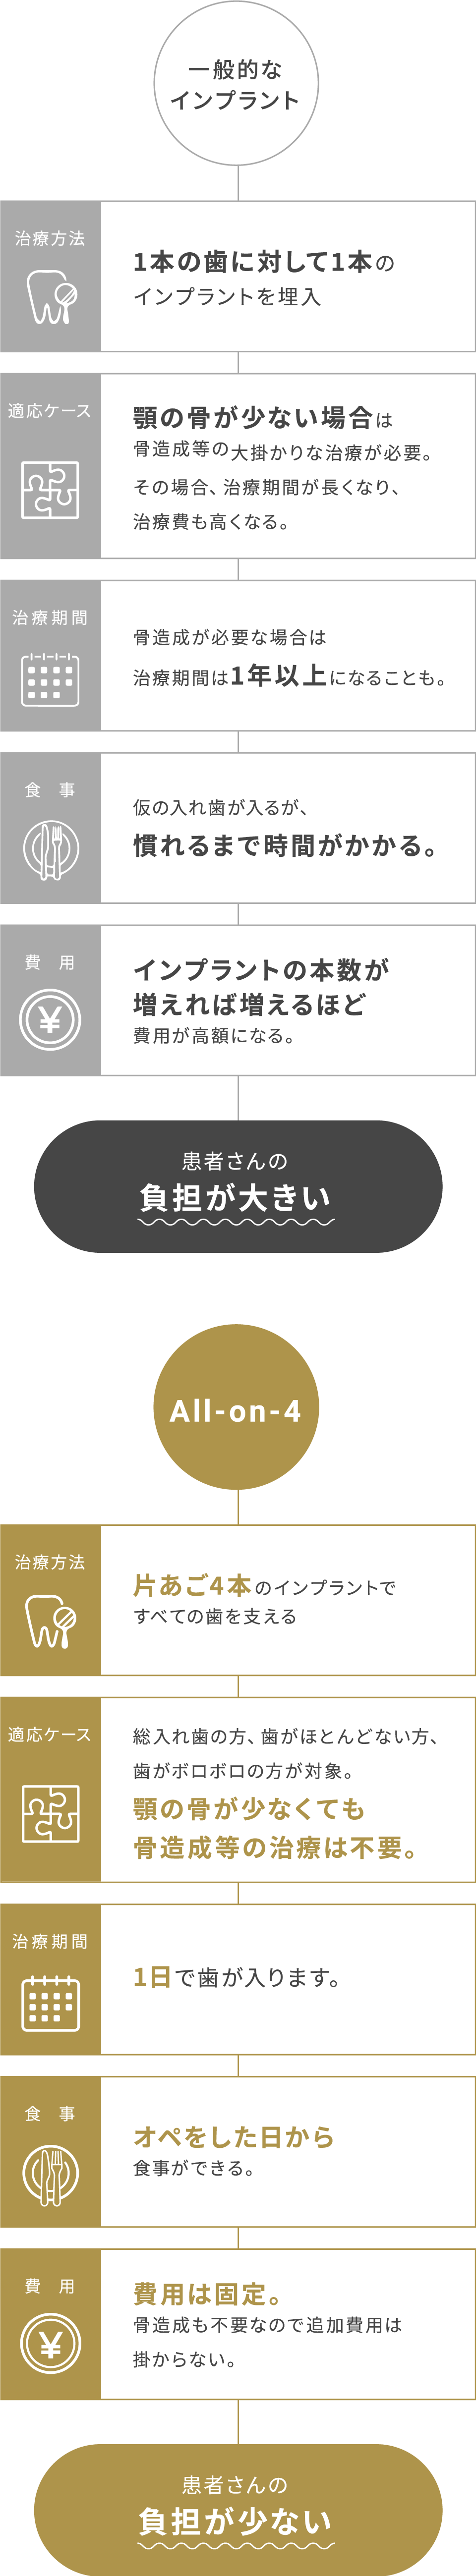 All-on-4